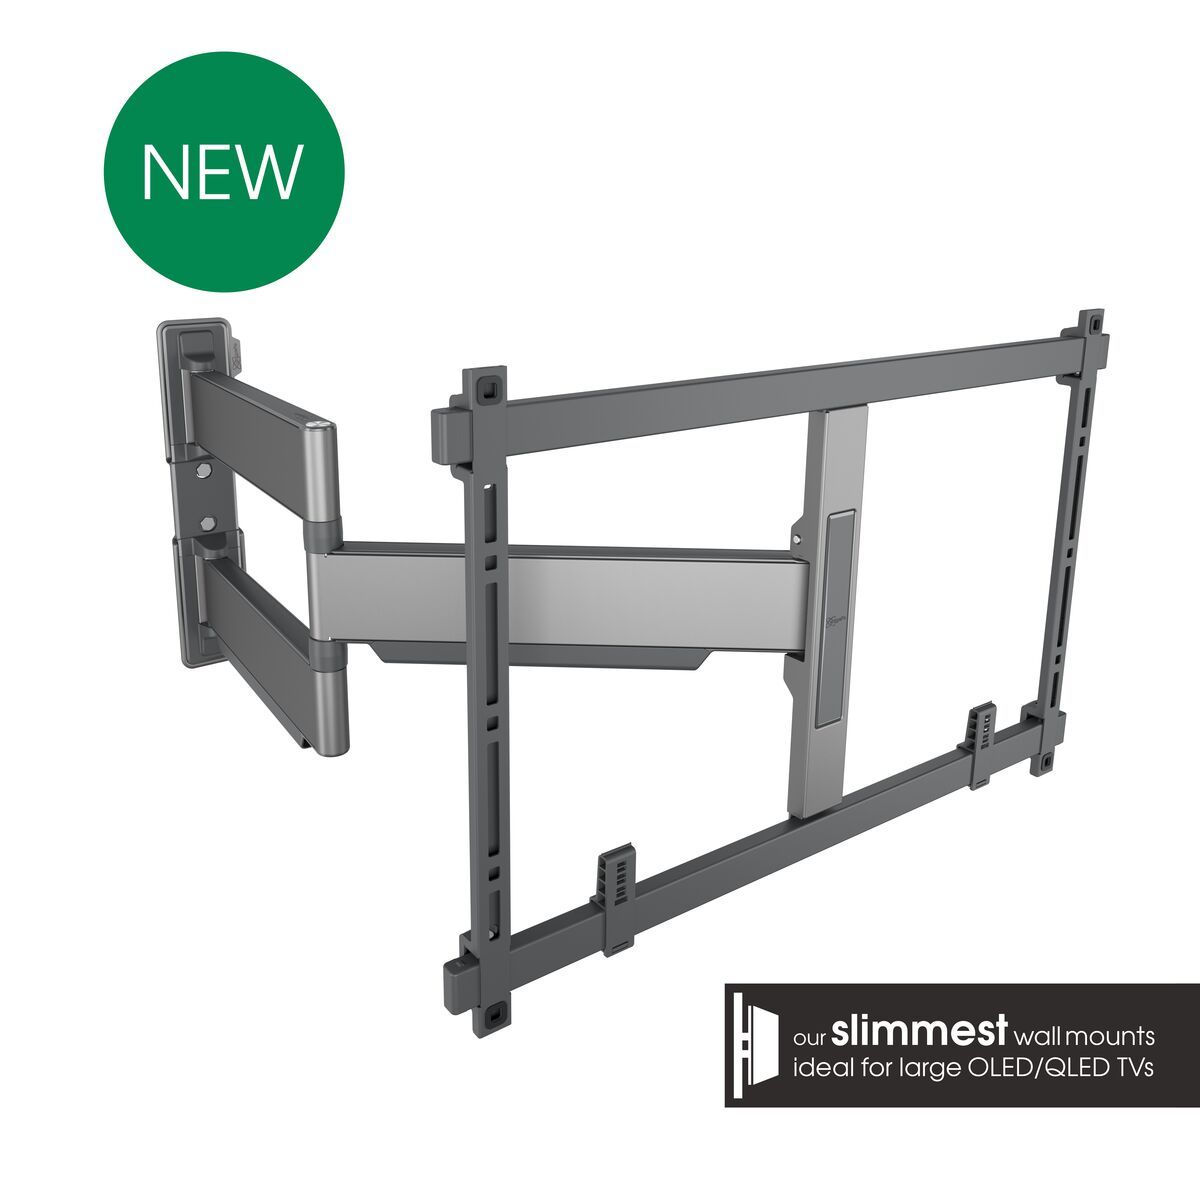 EXTRATHIN FULL-MOTION TV WALL MOUNT Swivel wall mounted stand By Vogel's -  Exhibo